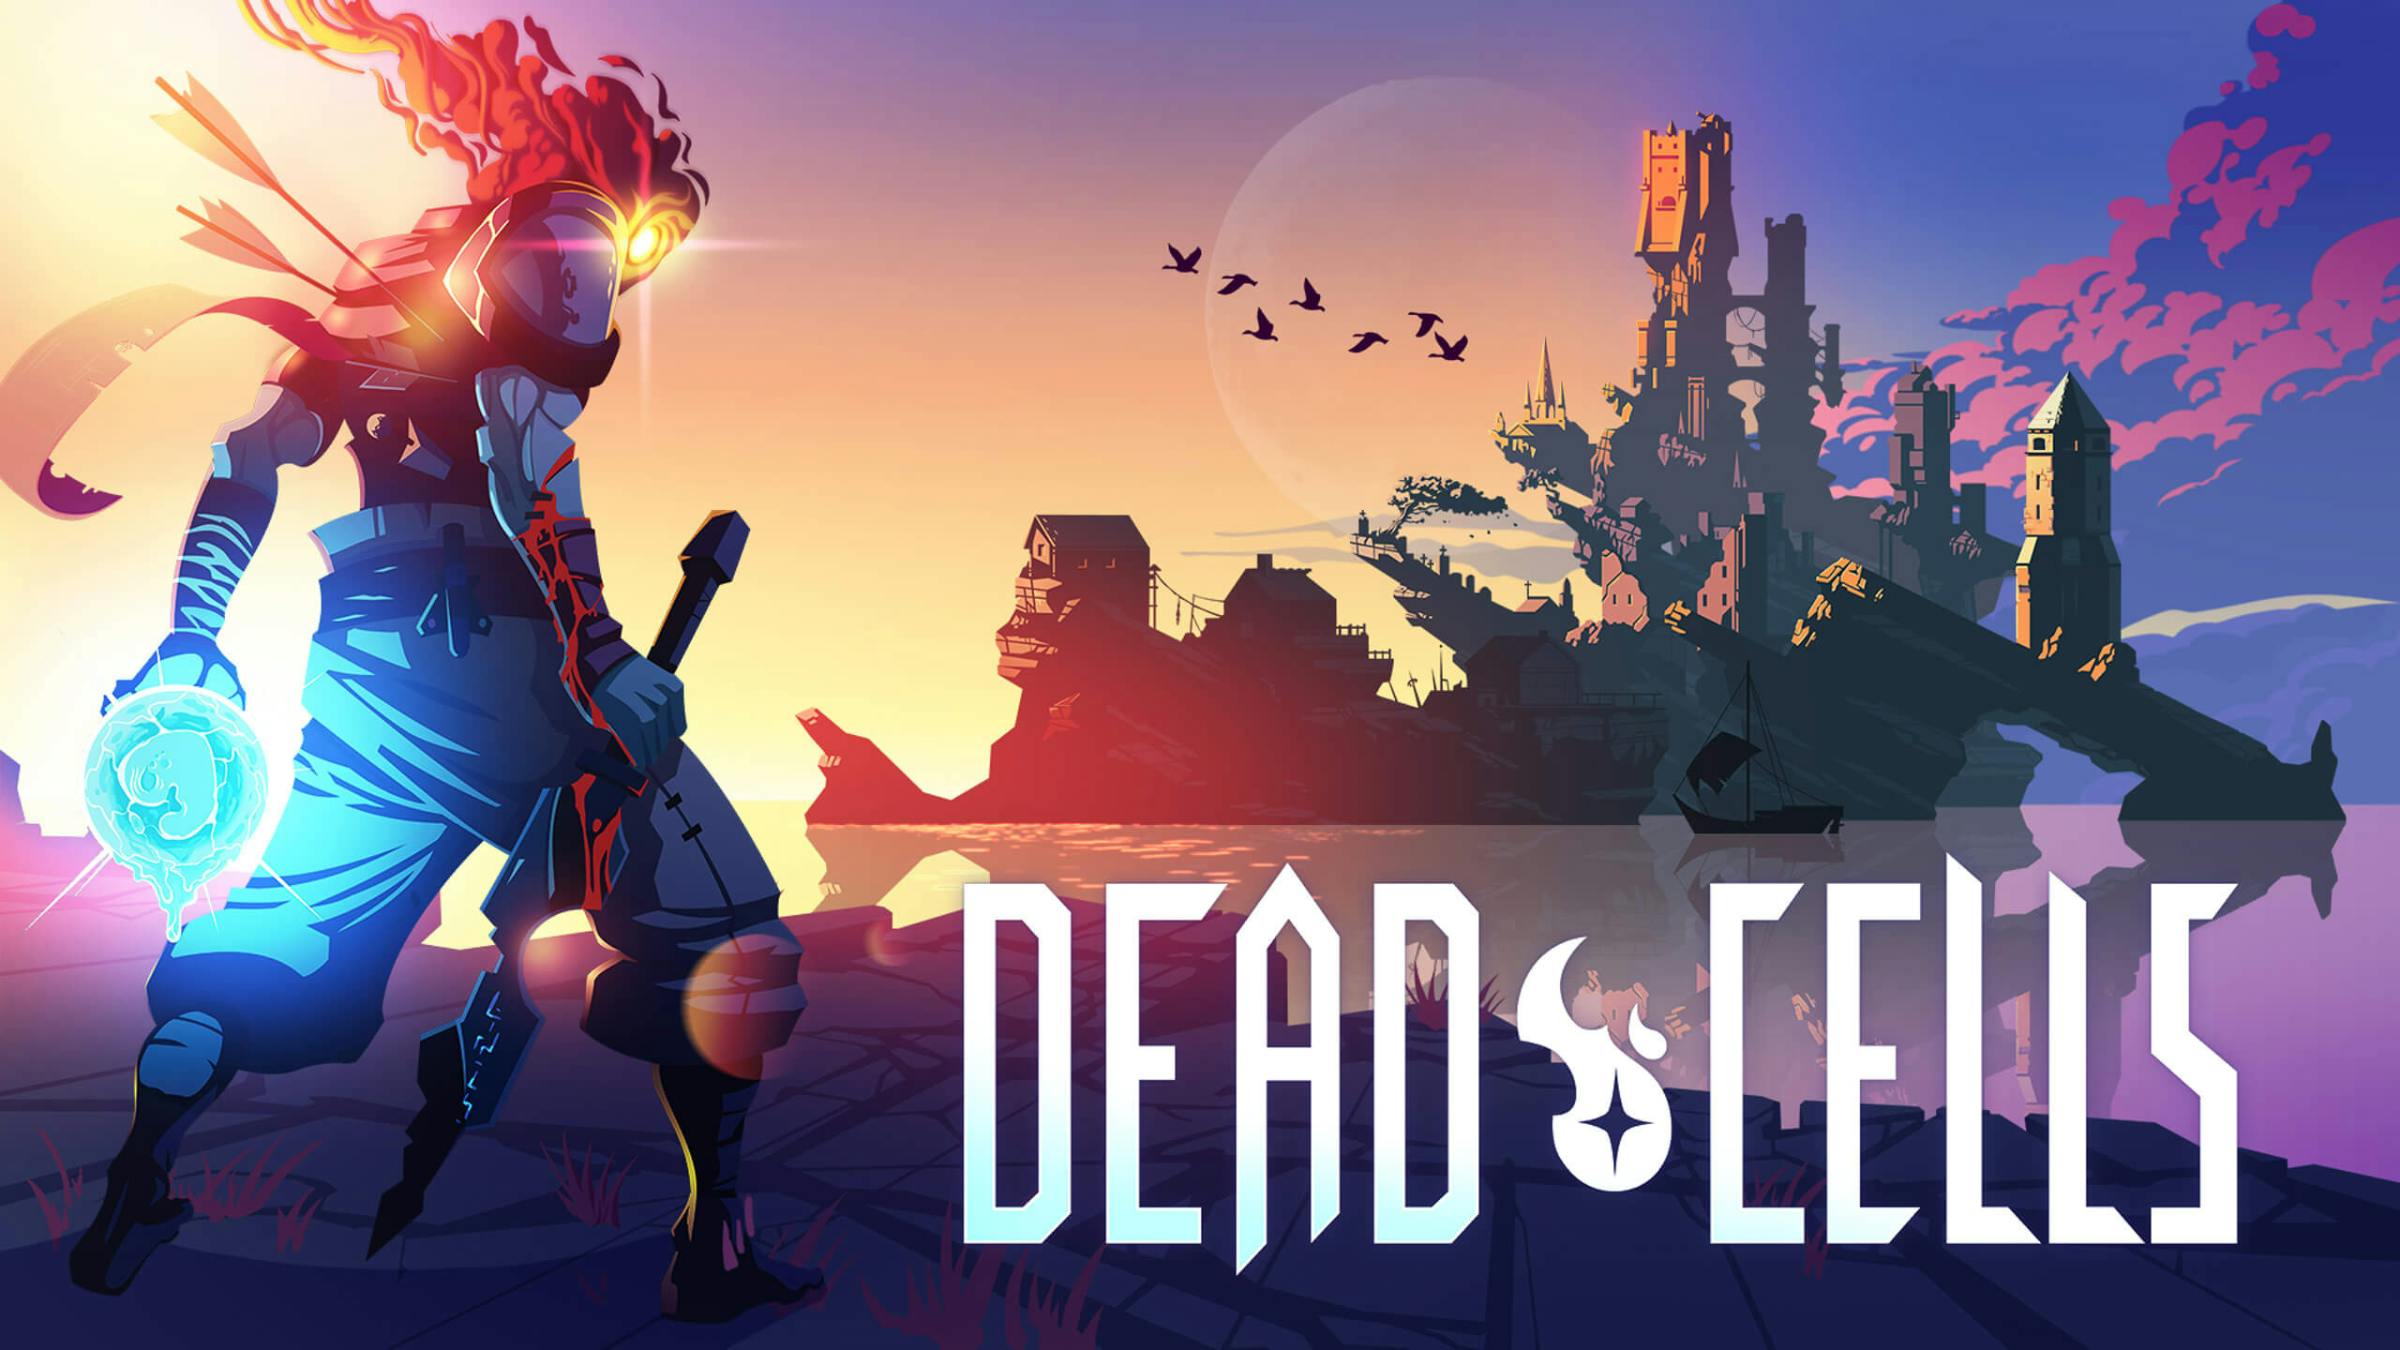 "Dead Cells" developers and publishers Motion Twin have done an excellent job at generating content to keep their fans engaged throughout the development cycle. 